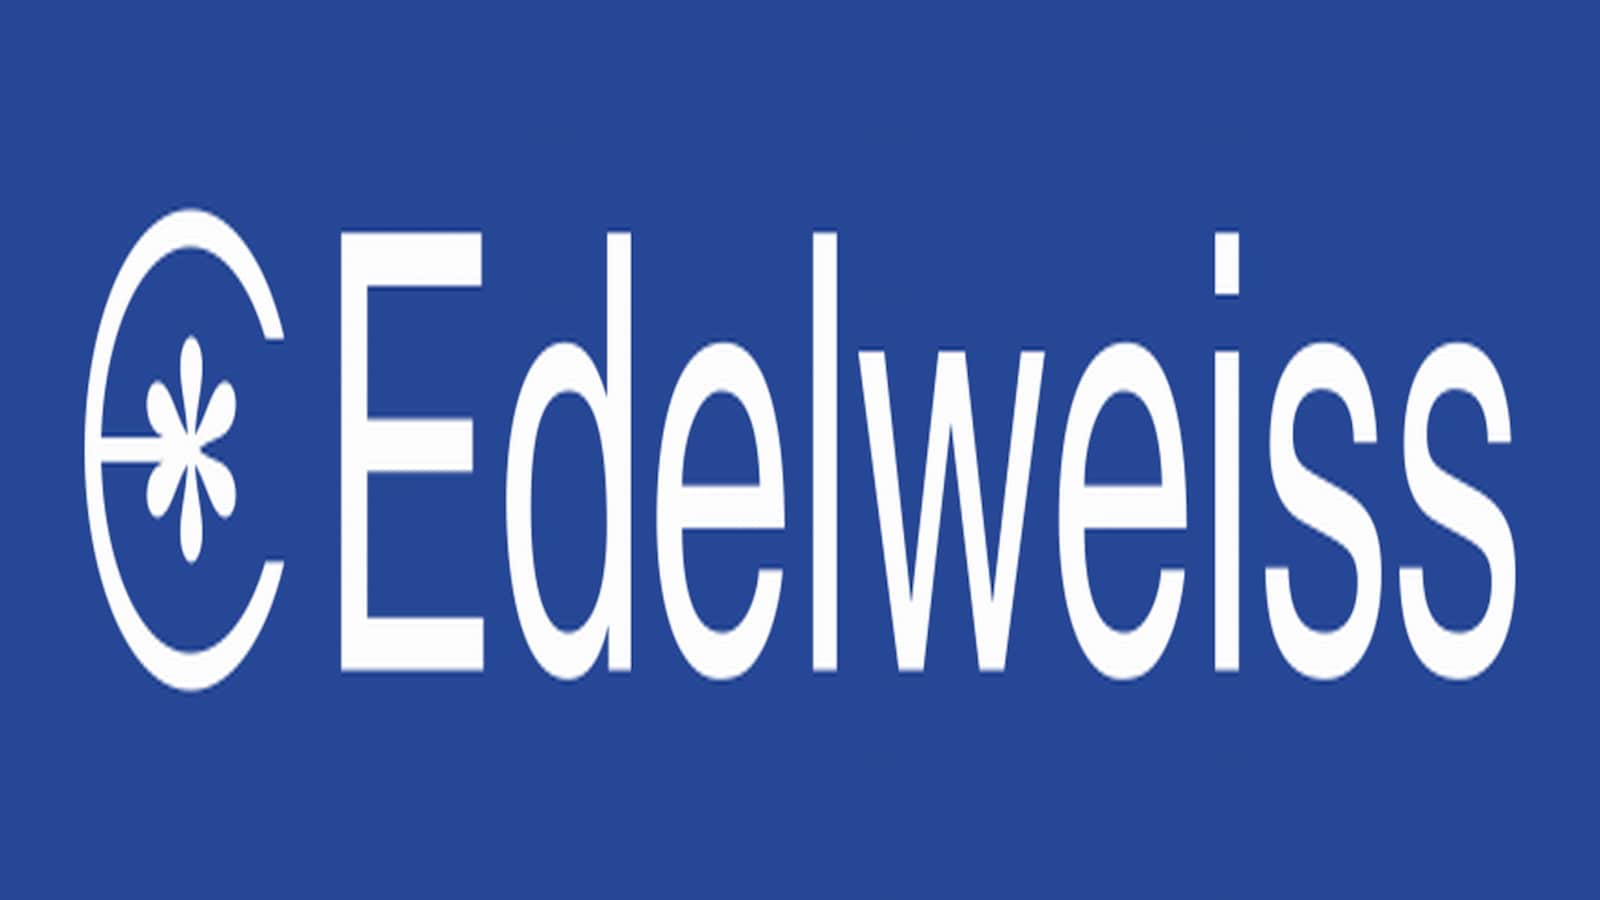 Edelweiss to acquire 2 funds of Milestone Capital Advisors